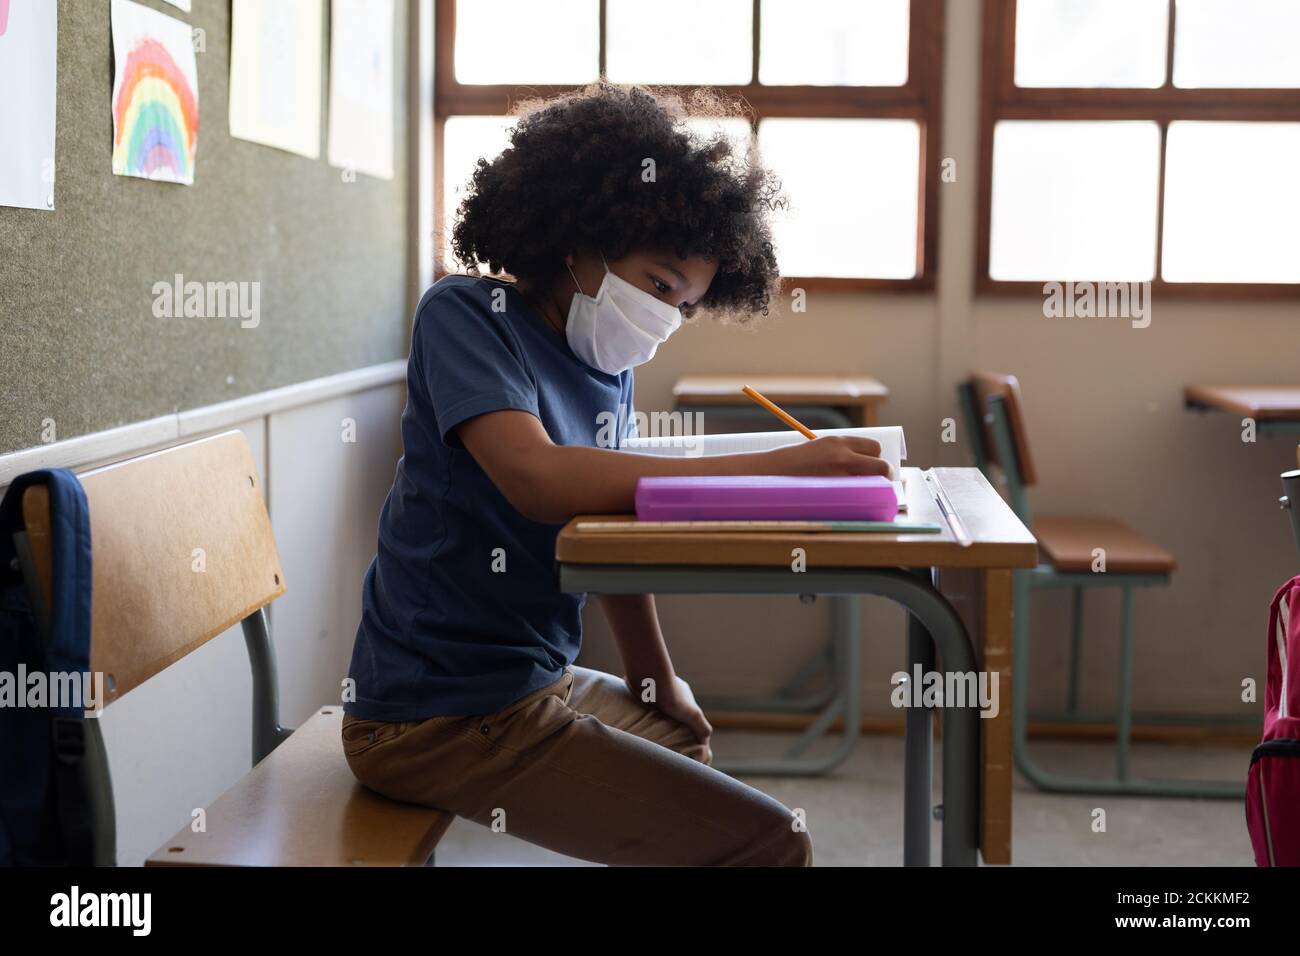 Boy wearing face mask writing while sitting on his desk at school Stock Photo